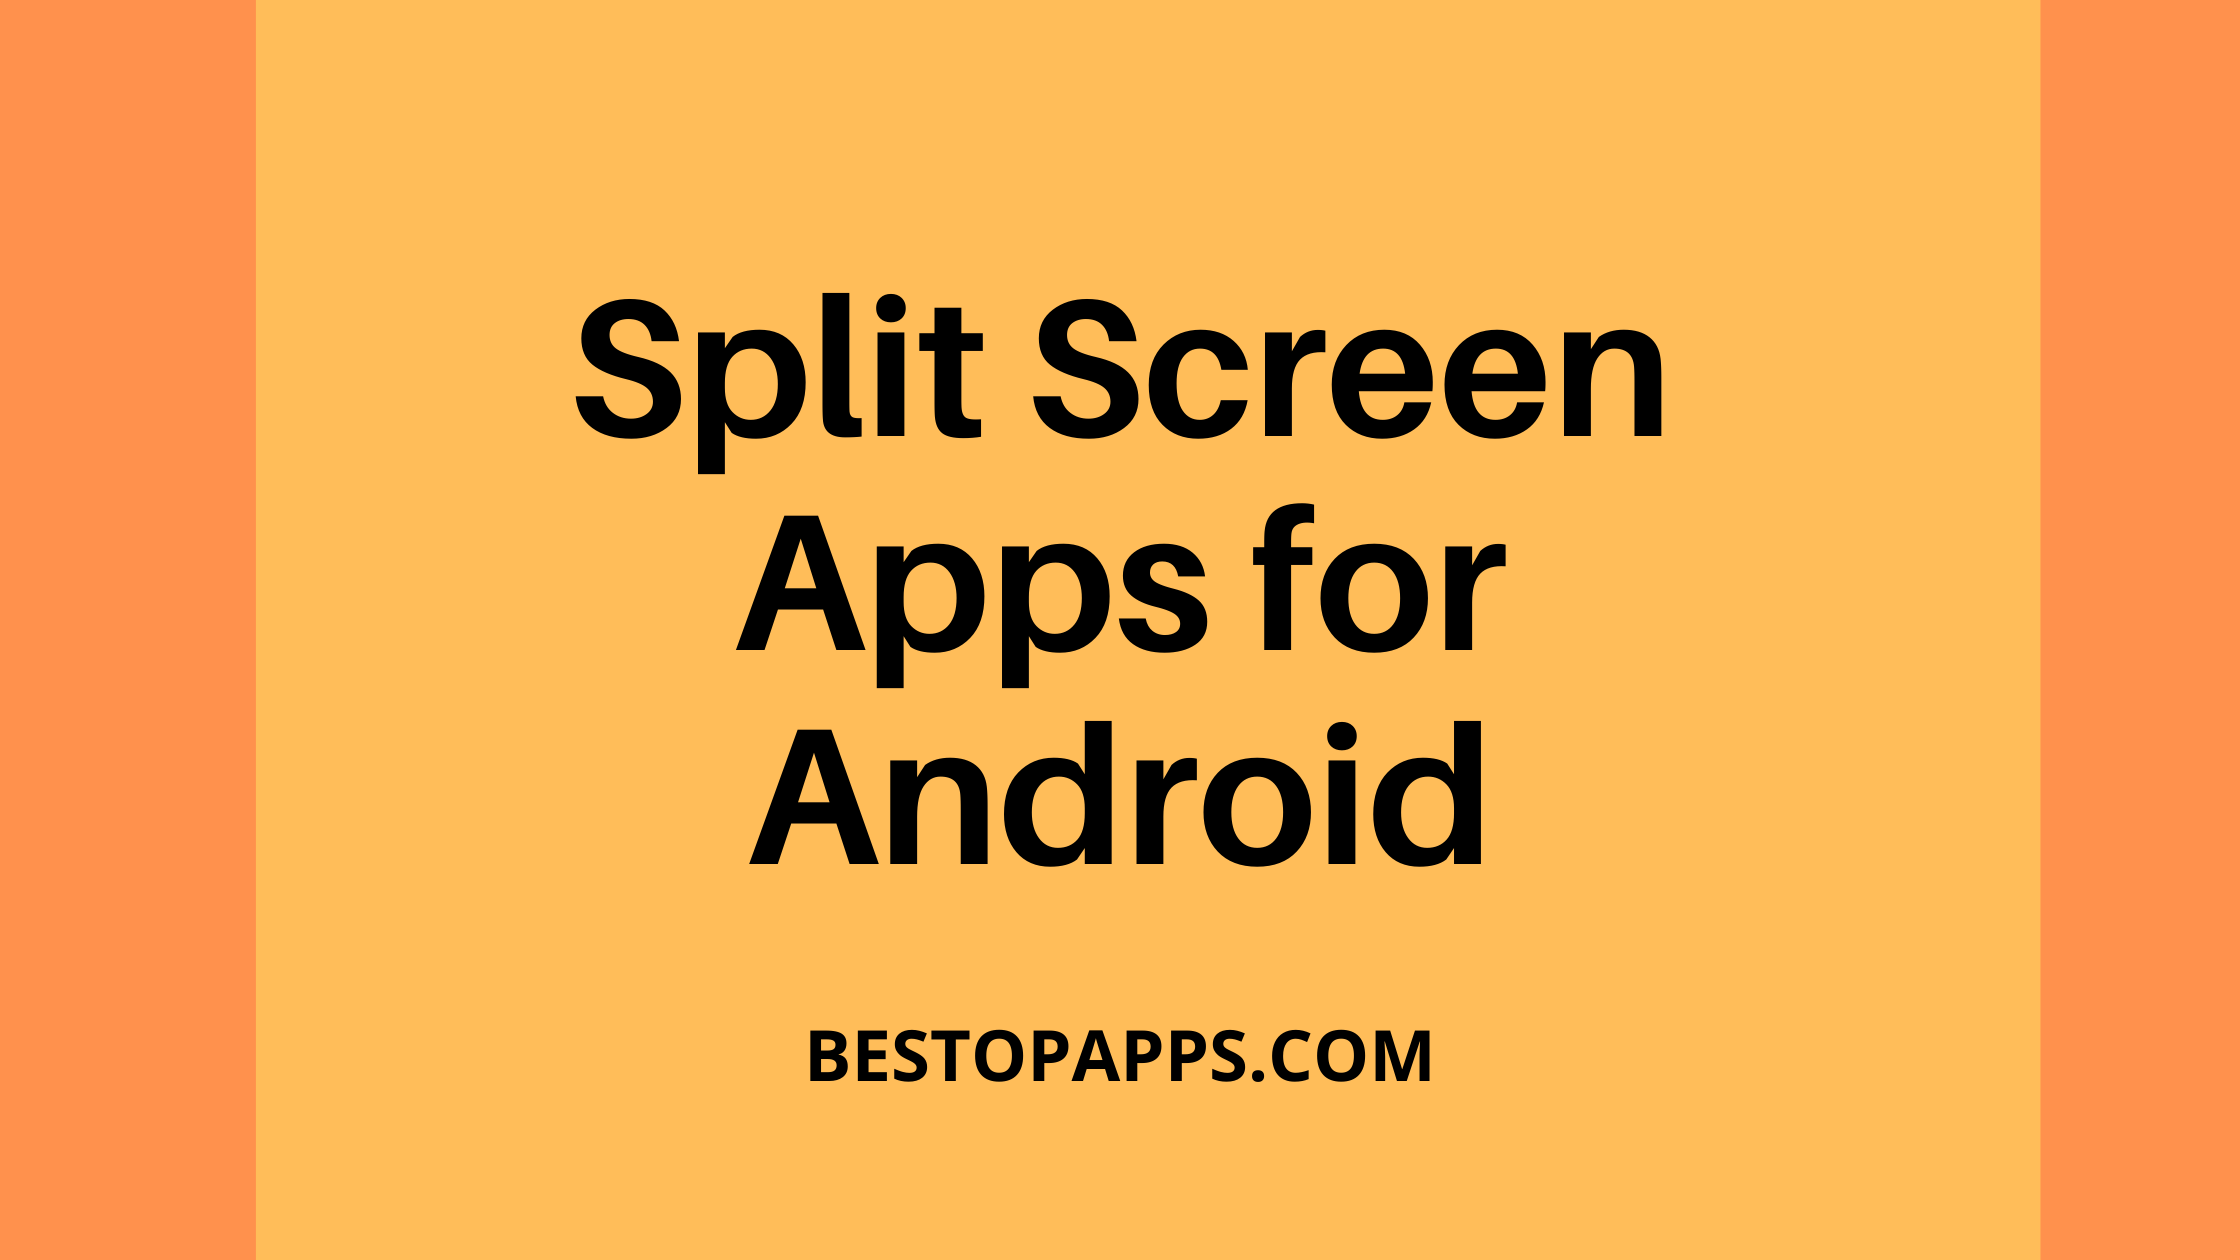 Split Screen Apps for Android